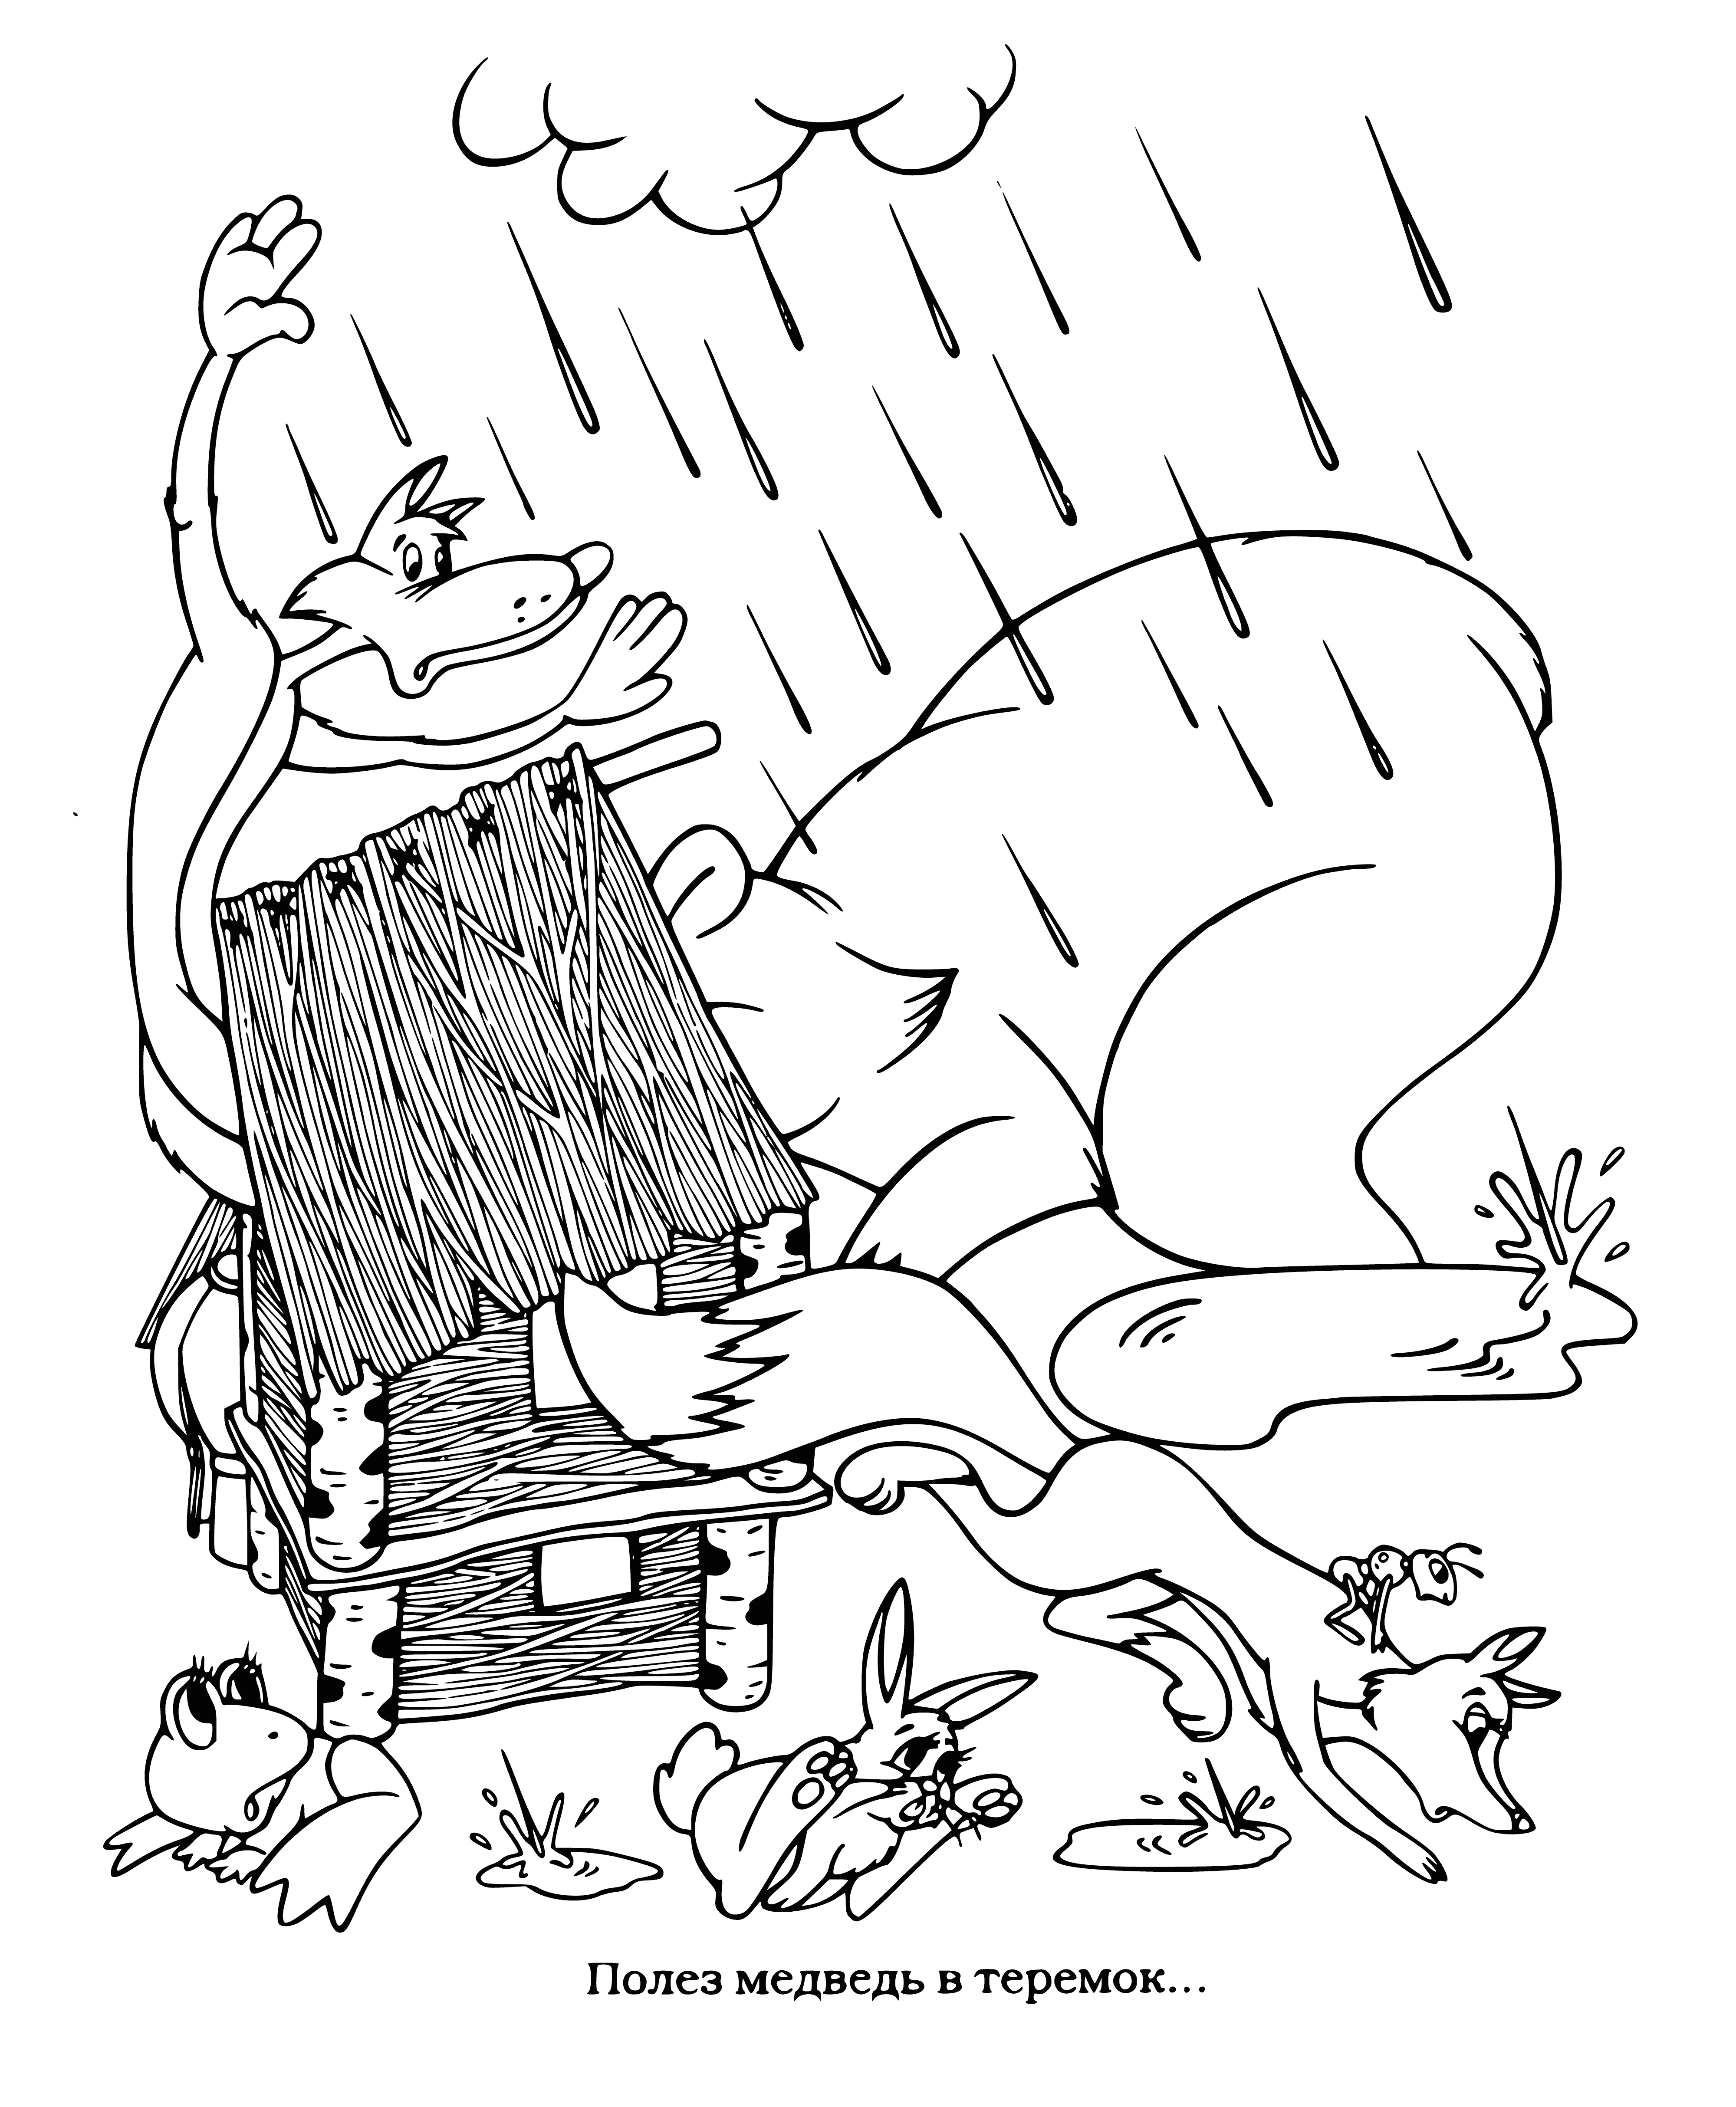 coloring page: A bear climbs a tree with powerful claws, back legs stretched out and a swishing tail.